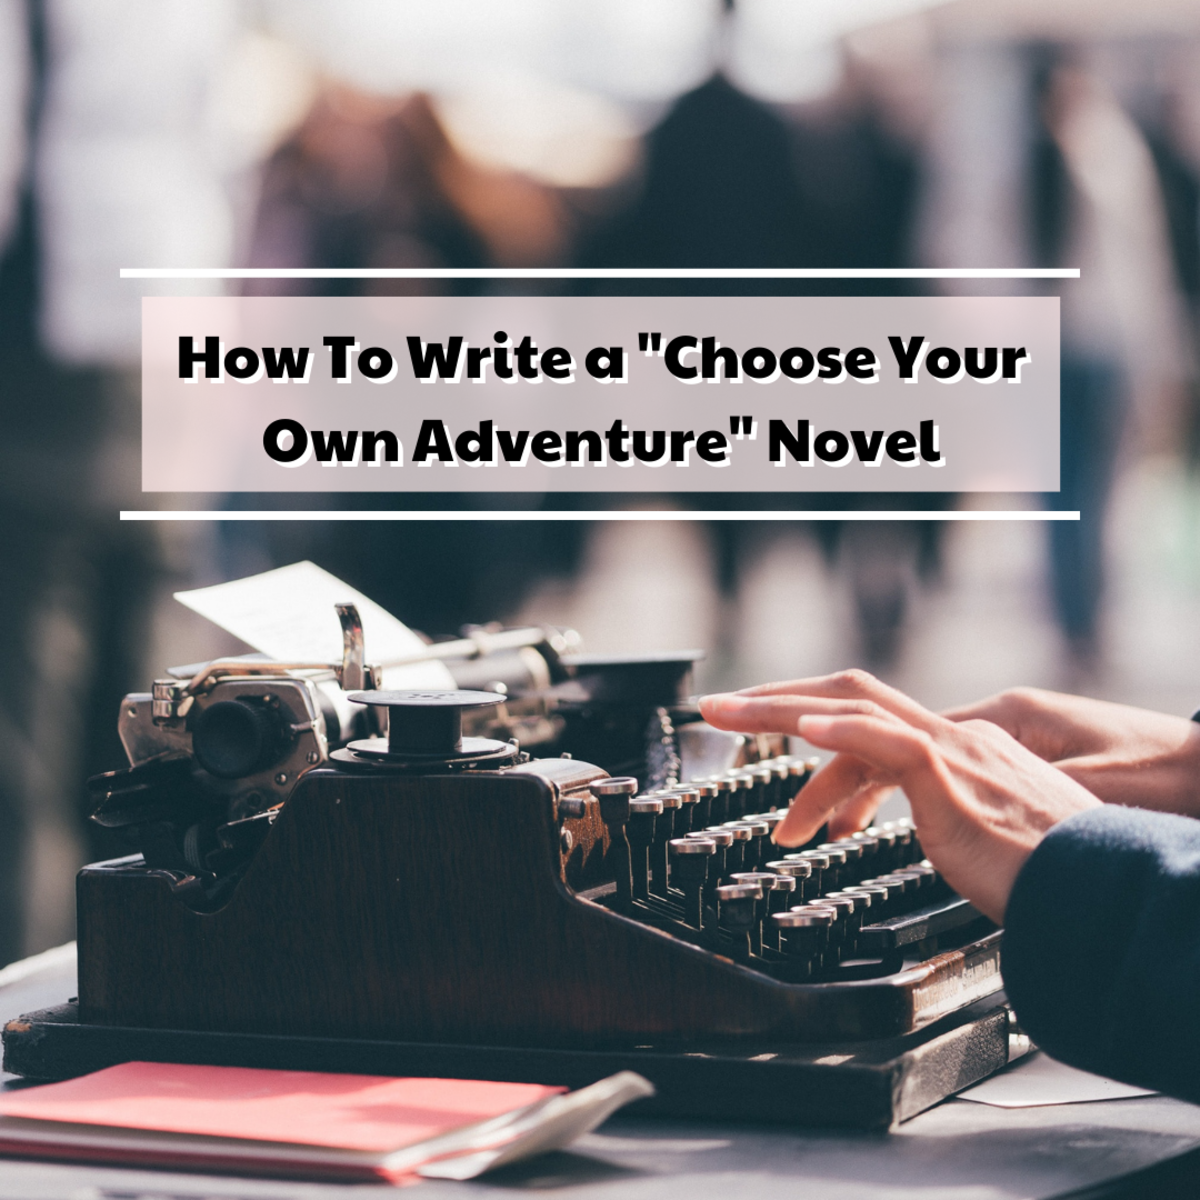 How To Write a “Choose Your Own Adventure” Novel